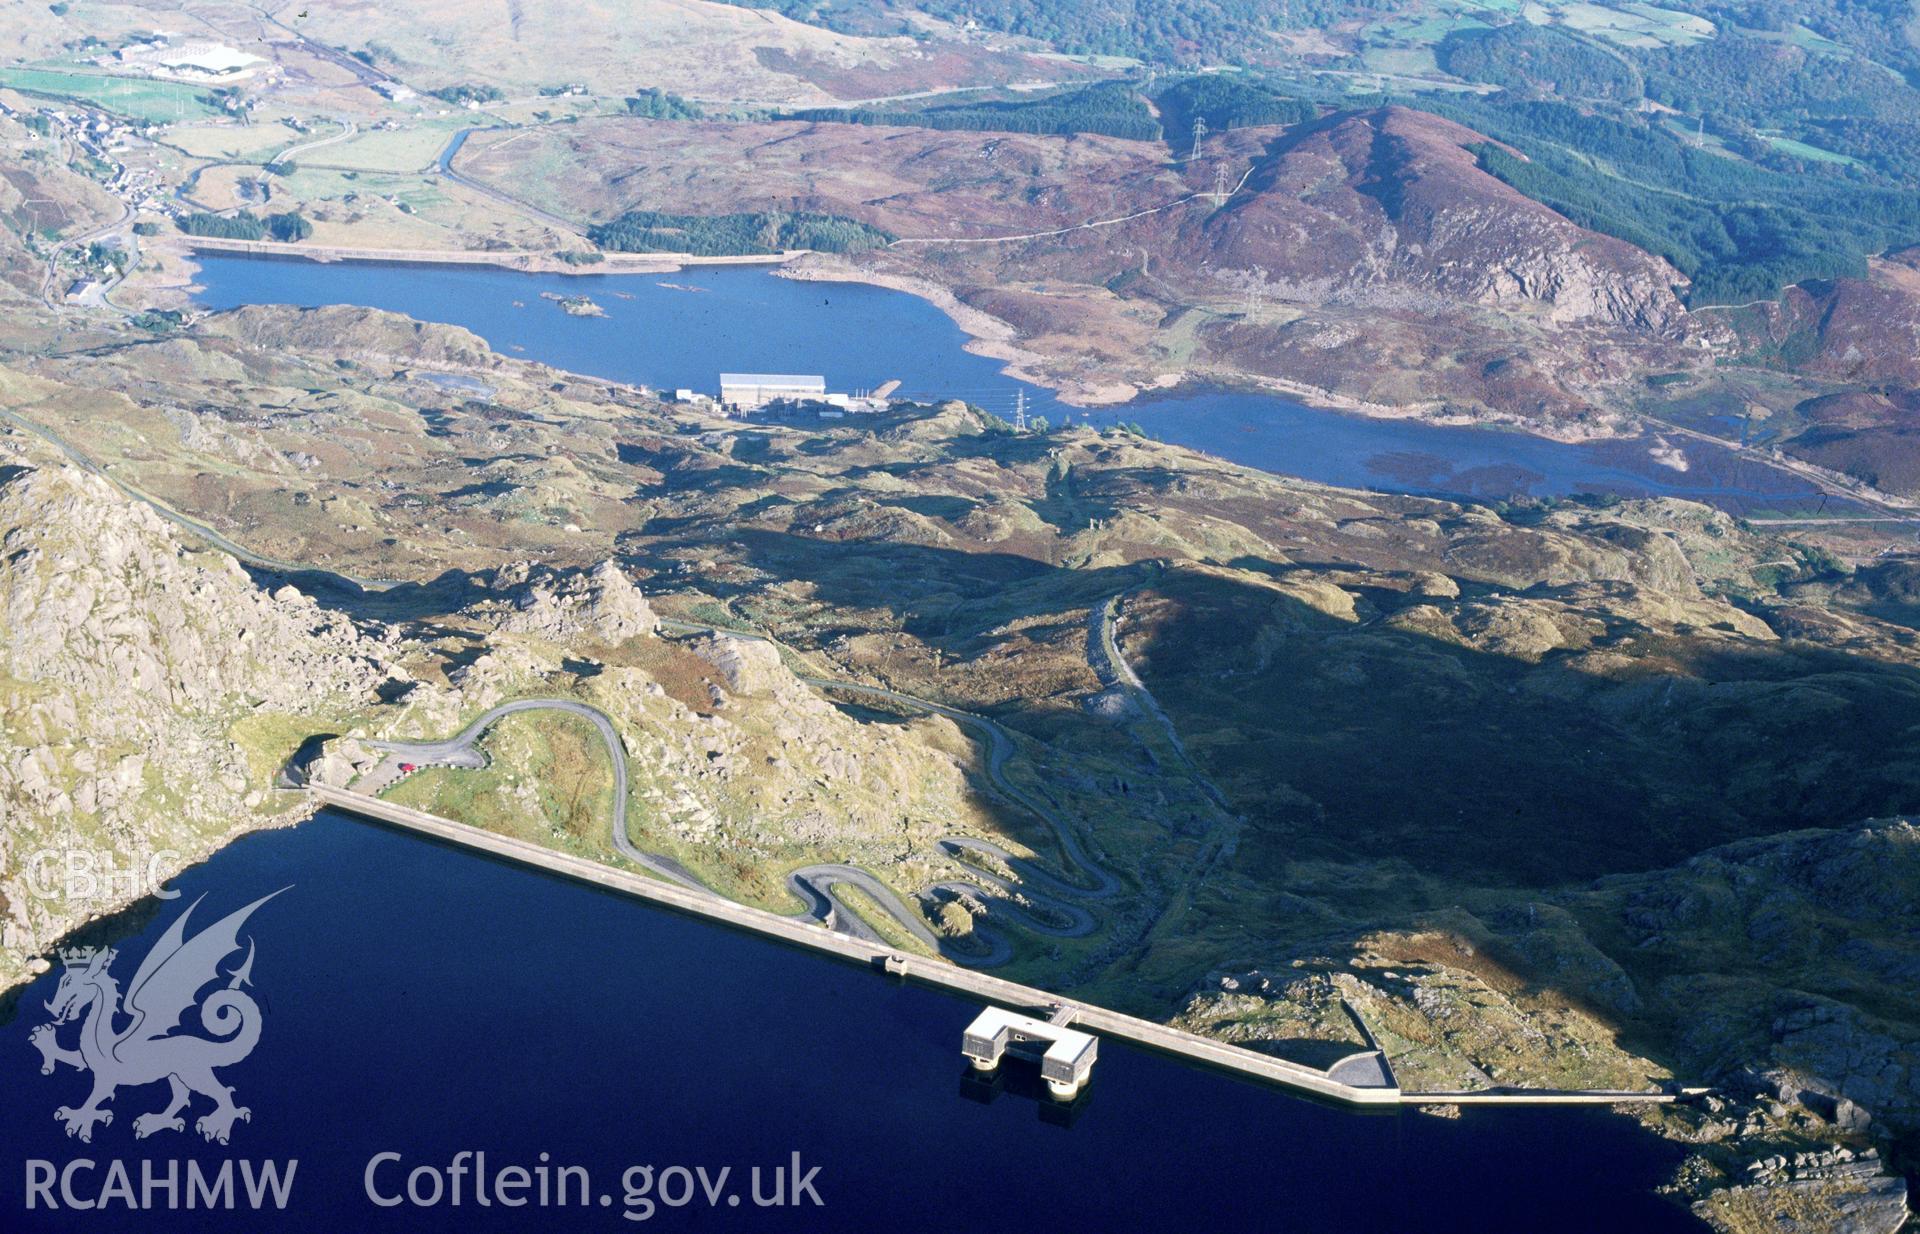 Slide of RCAHMW colour oblique aerial photograph of Llyn Stwlan Reservoir, taken by C.R. Musson, 9/10/1994.